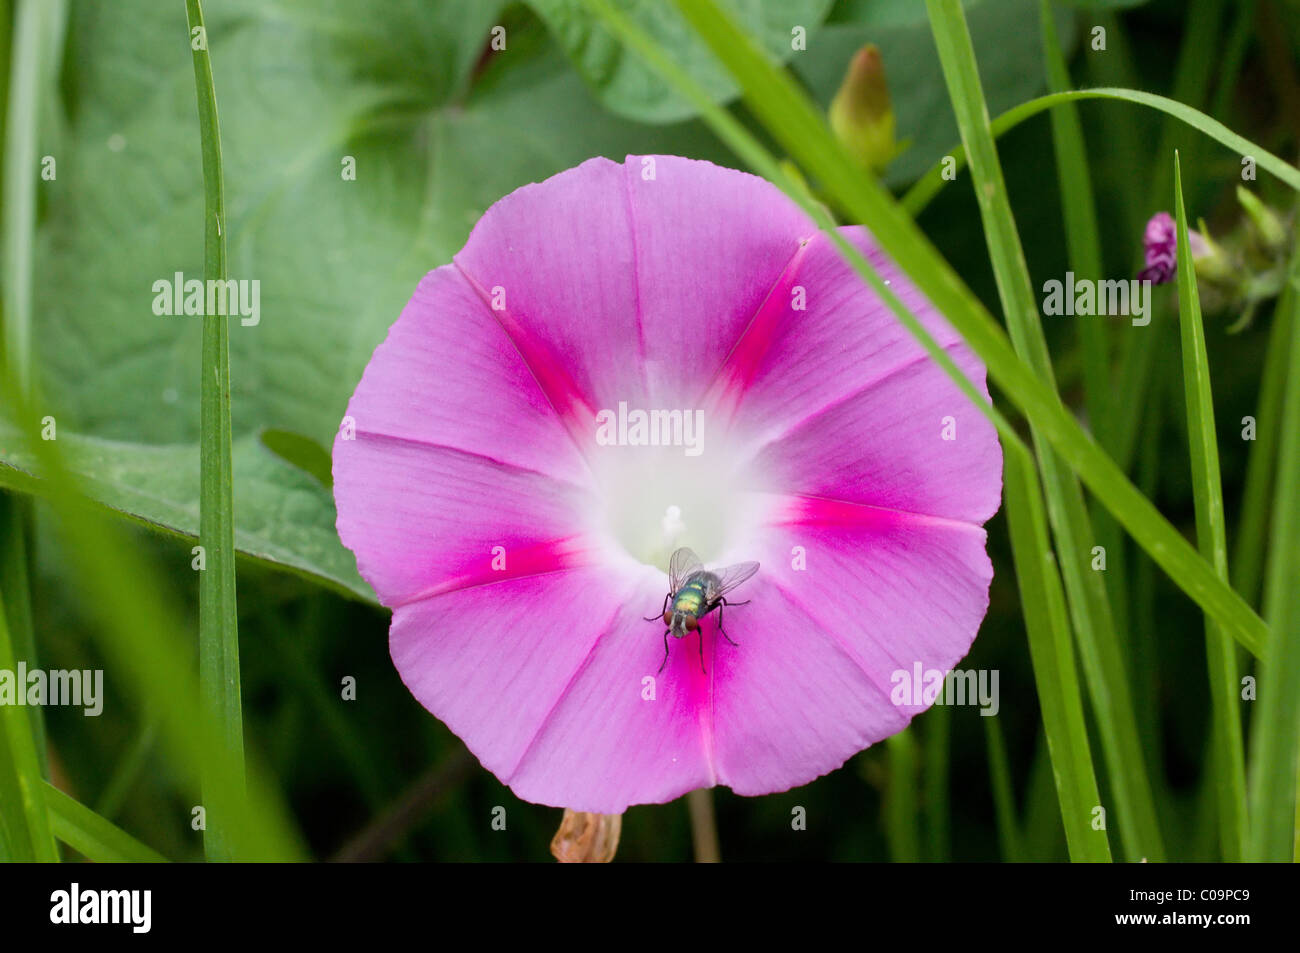 Photo of a Morning glory flower (Ipomoea Violacea) with a green bottle fly in Mexico Stock Photo